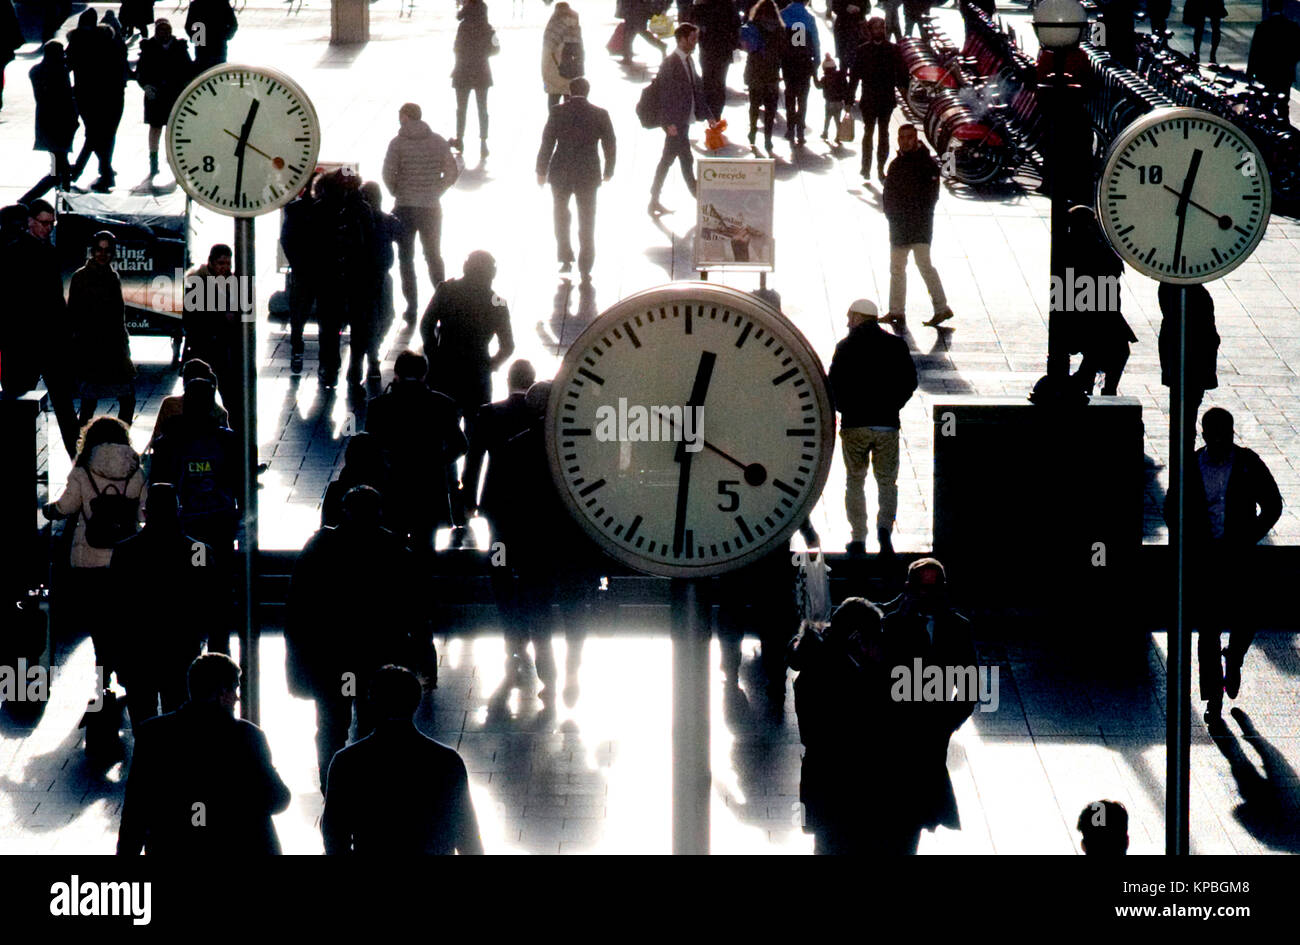 Pedestrians walk past decorative clocks in the Canary Wharf financial district in east London, Britain December 13, 2017 Stock Photo